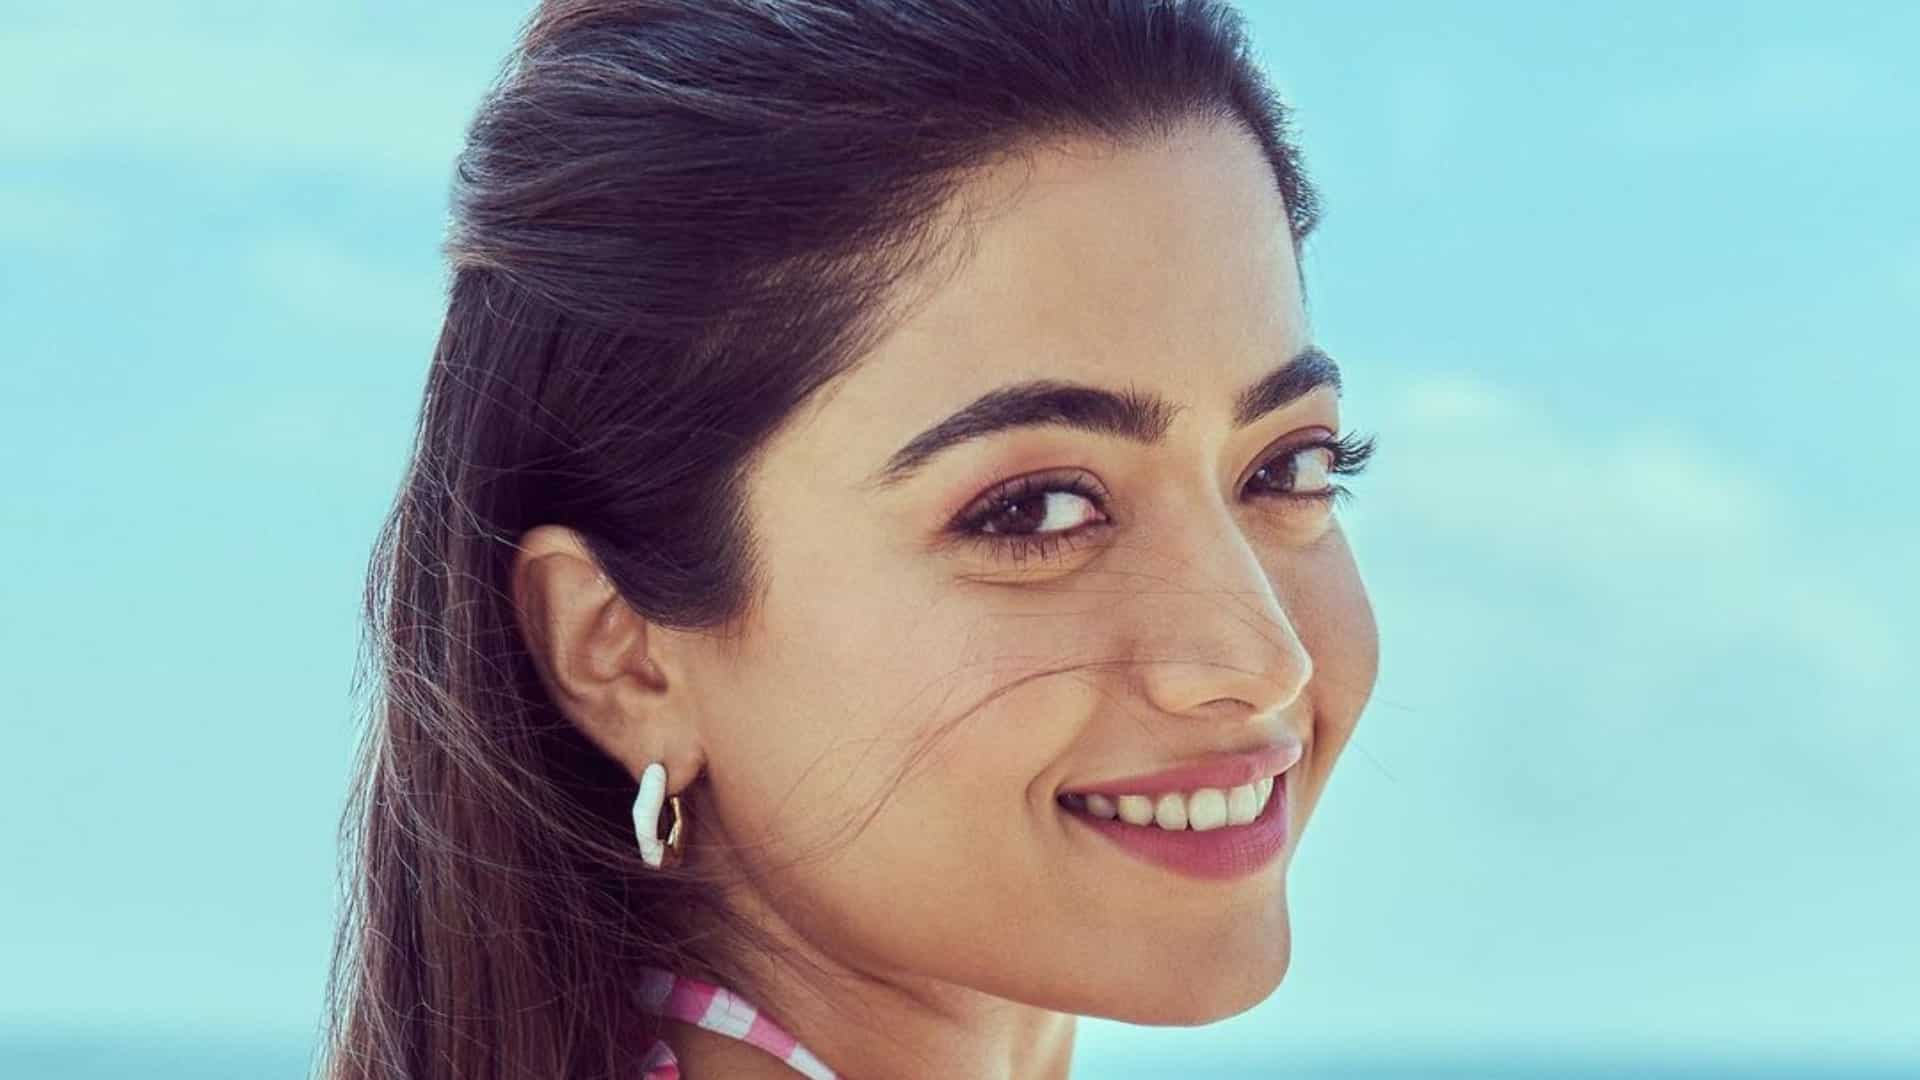 https://www.mobilemasala.com/film-gossip/Rashmika-Mandanna-signs-a-film-with-a-debut-director-will-romance-a-happening-young-hero-from-Tollywood-heres-what-we-know-i156076